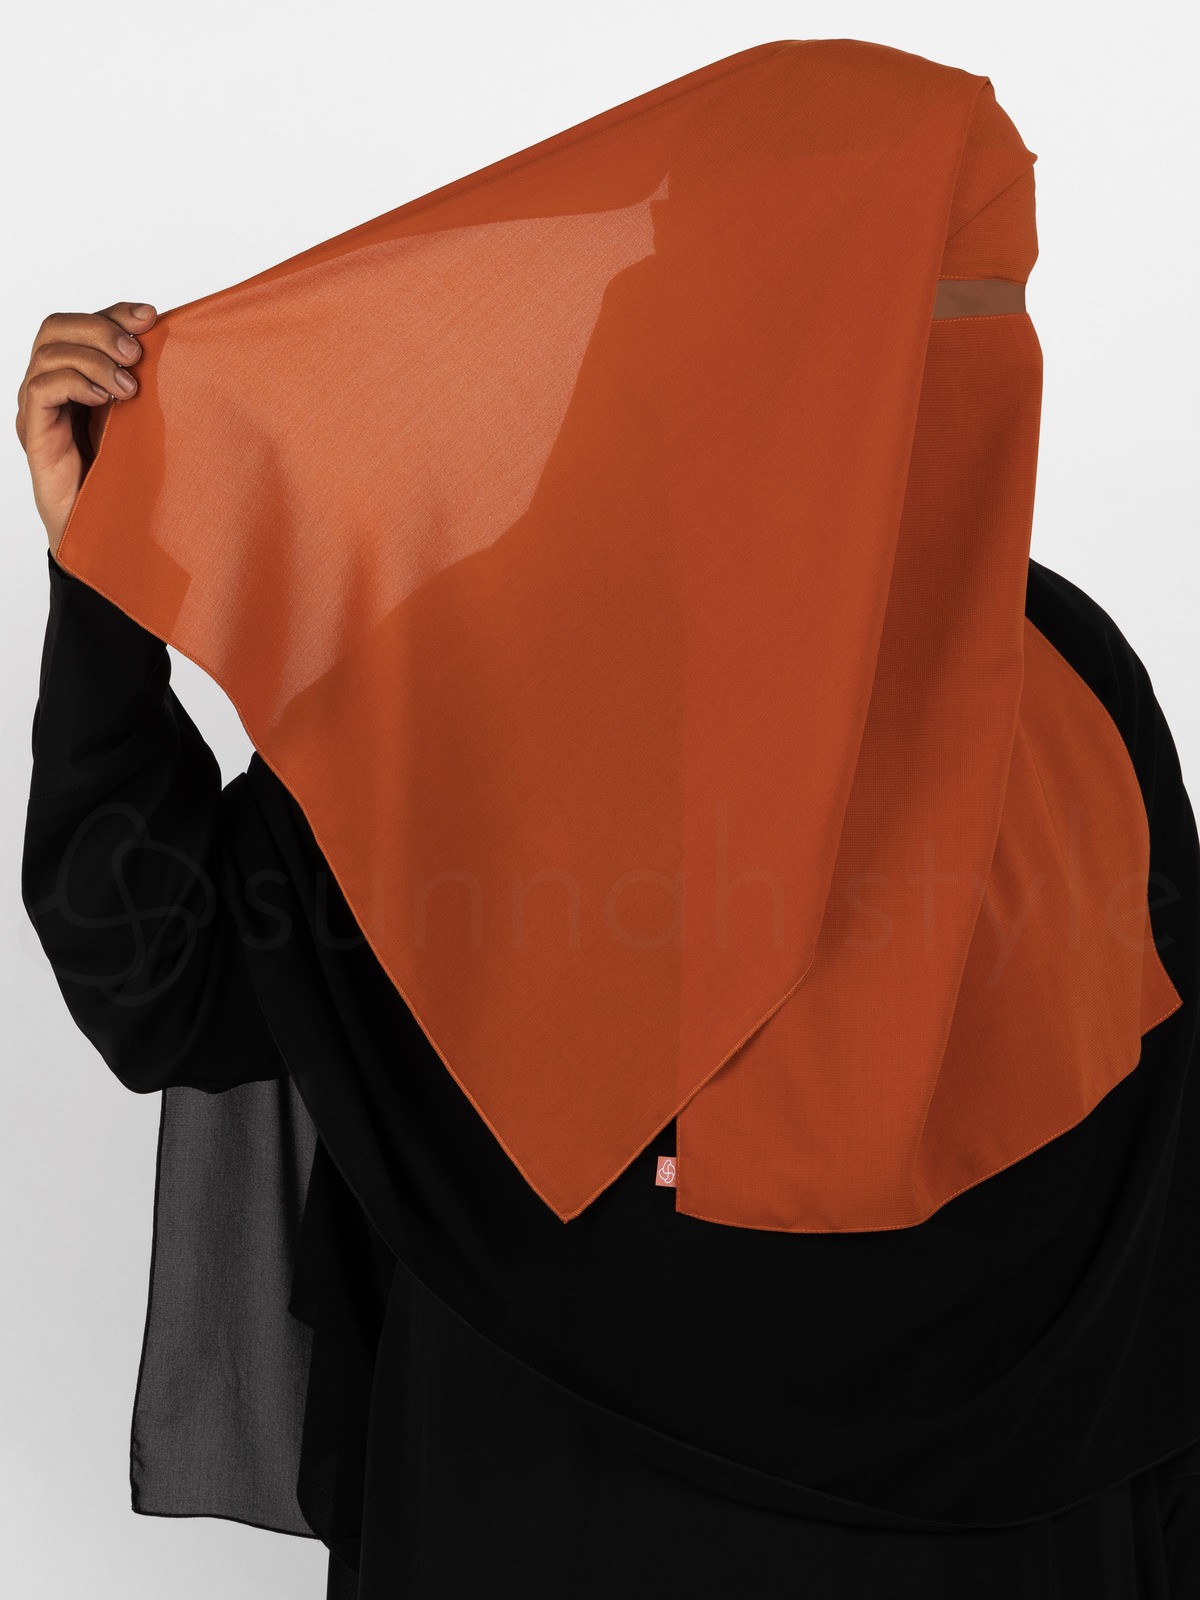 Sunnah Style - No-Pinch Two Layer Niqab (Autumn)